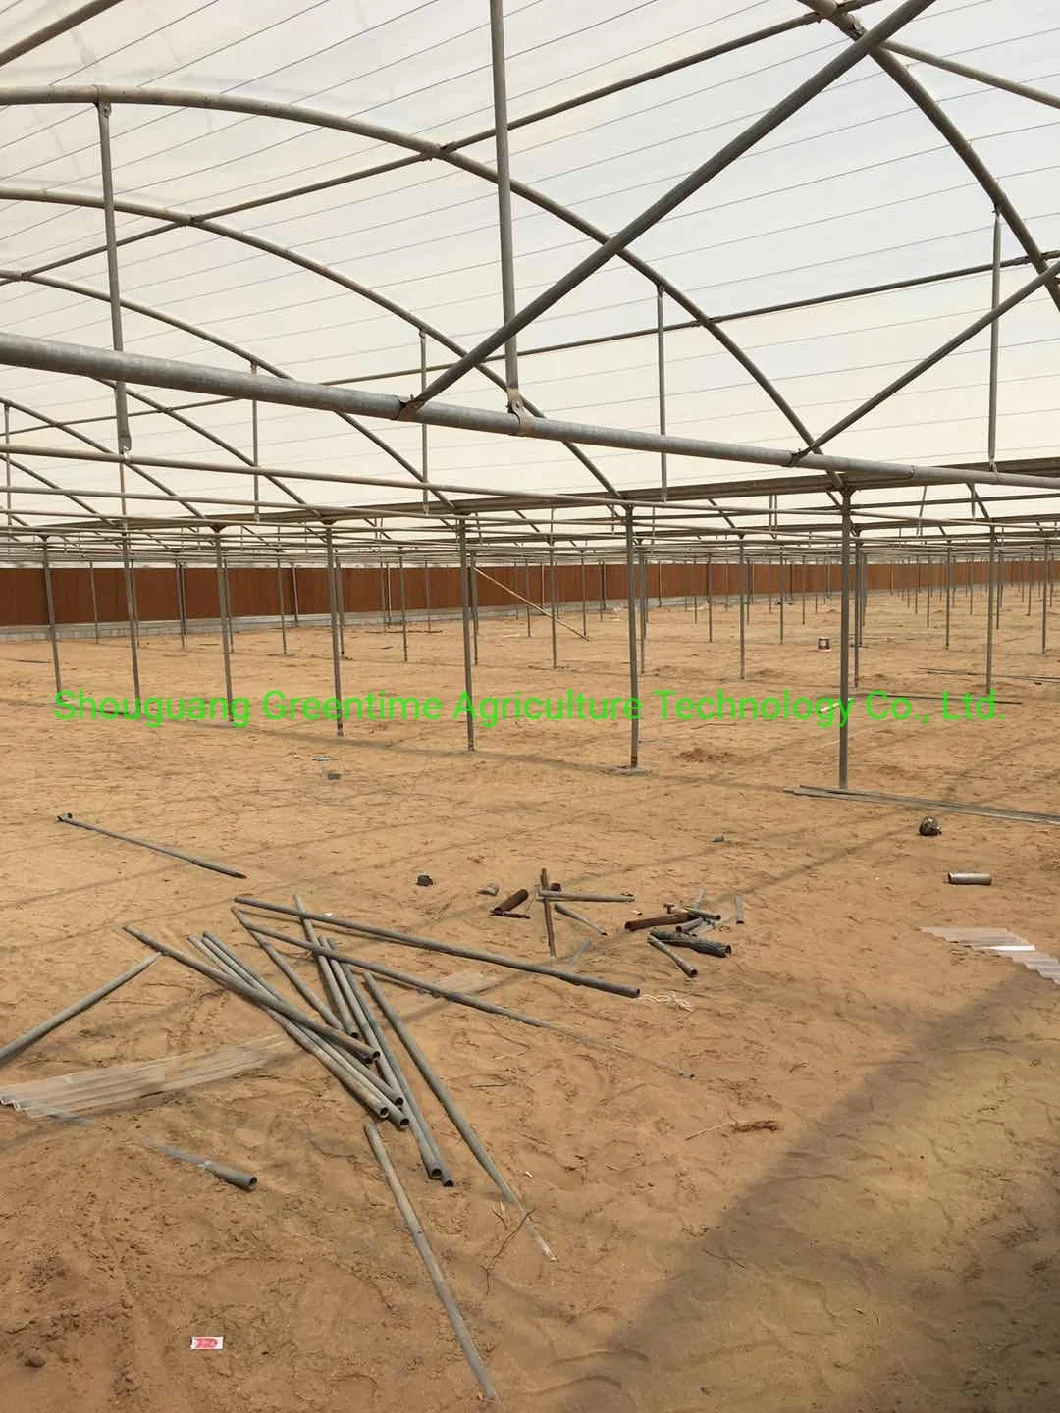 Round Type Polycarbonate Plastic PC Greenhouse for Vegetables/Flowers/Tomato/Cucumber Cultivation with Outside Shading System